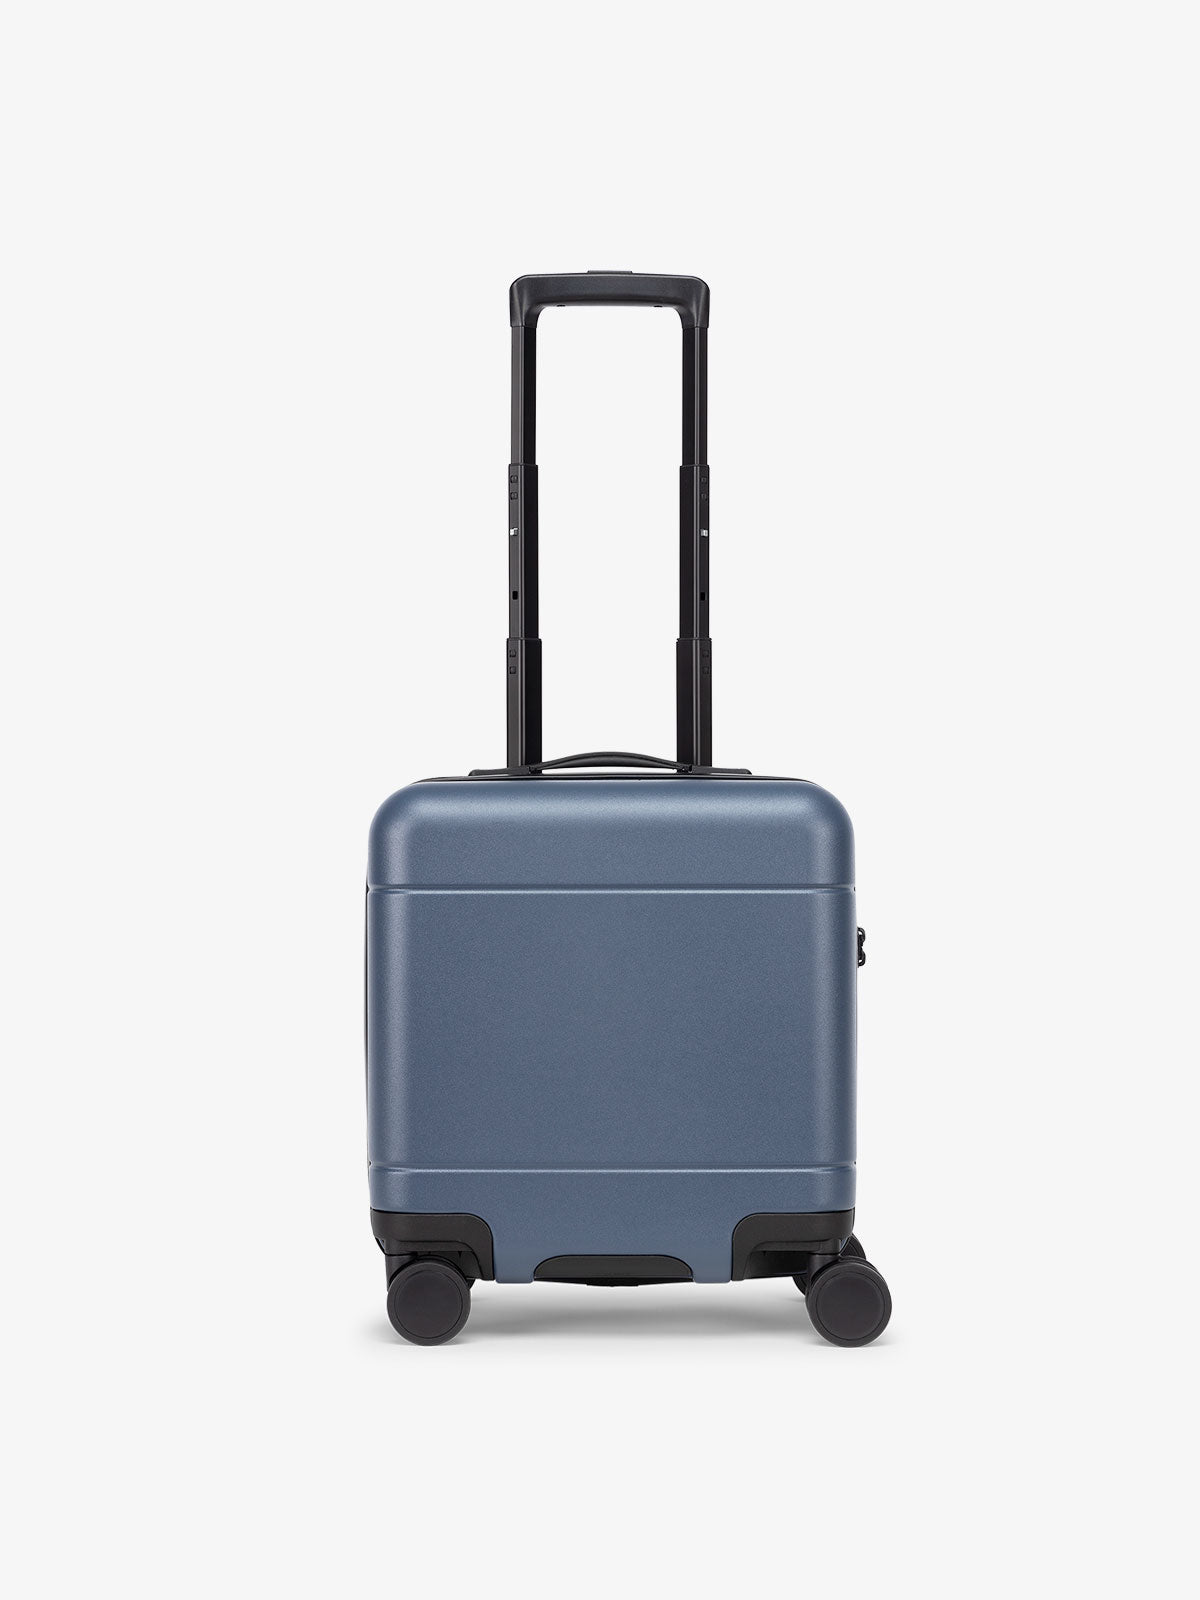 Carry-On Luggage & Suitcases